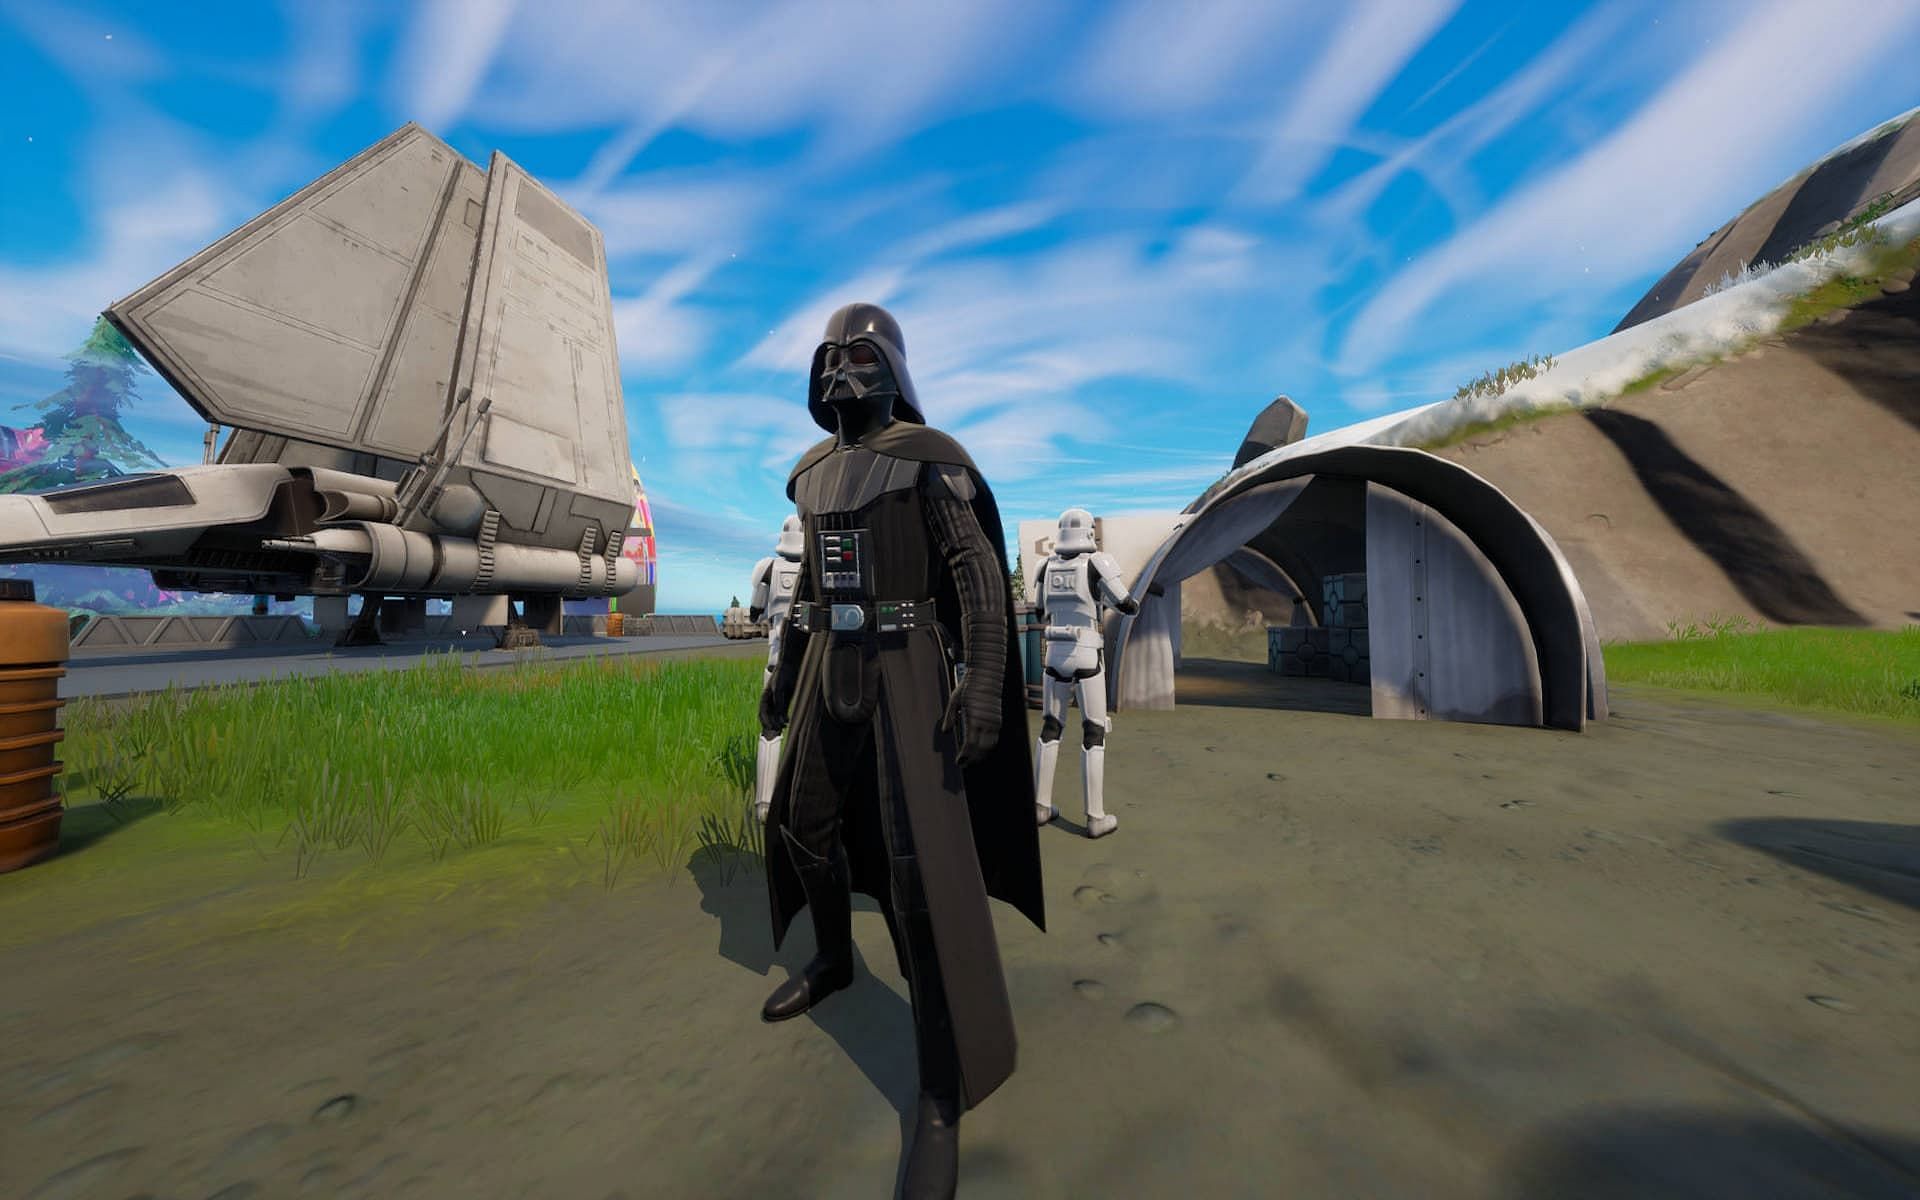 Darth Vader sets up an outpost on the island in Fortnite Chapter 3 Season 3 (Image via Epic Games)